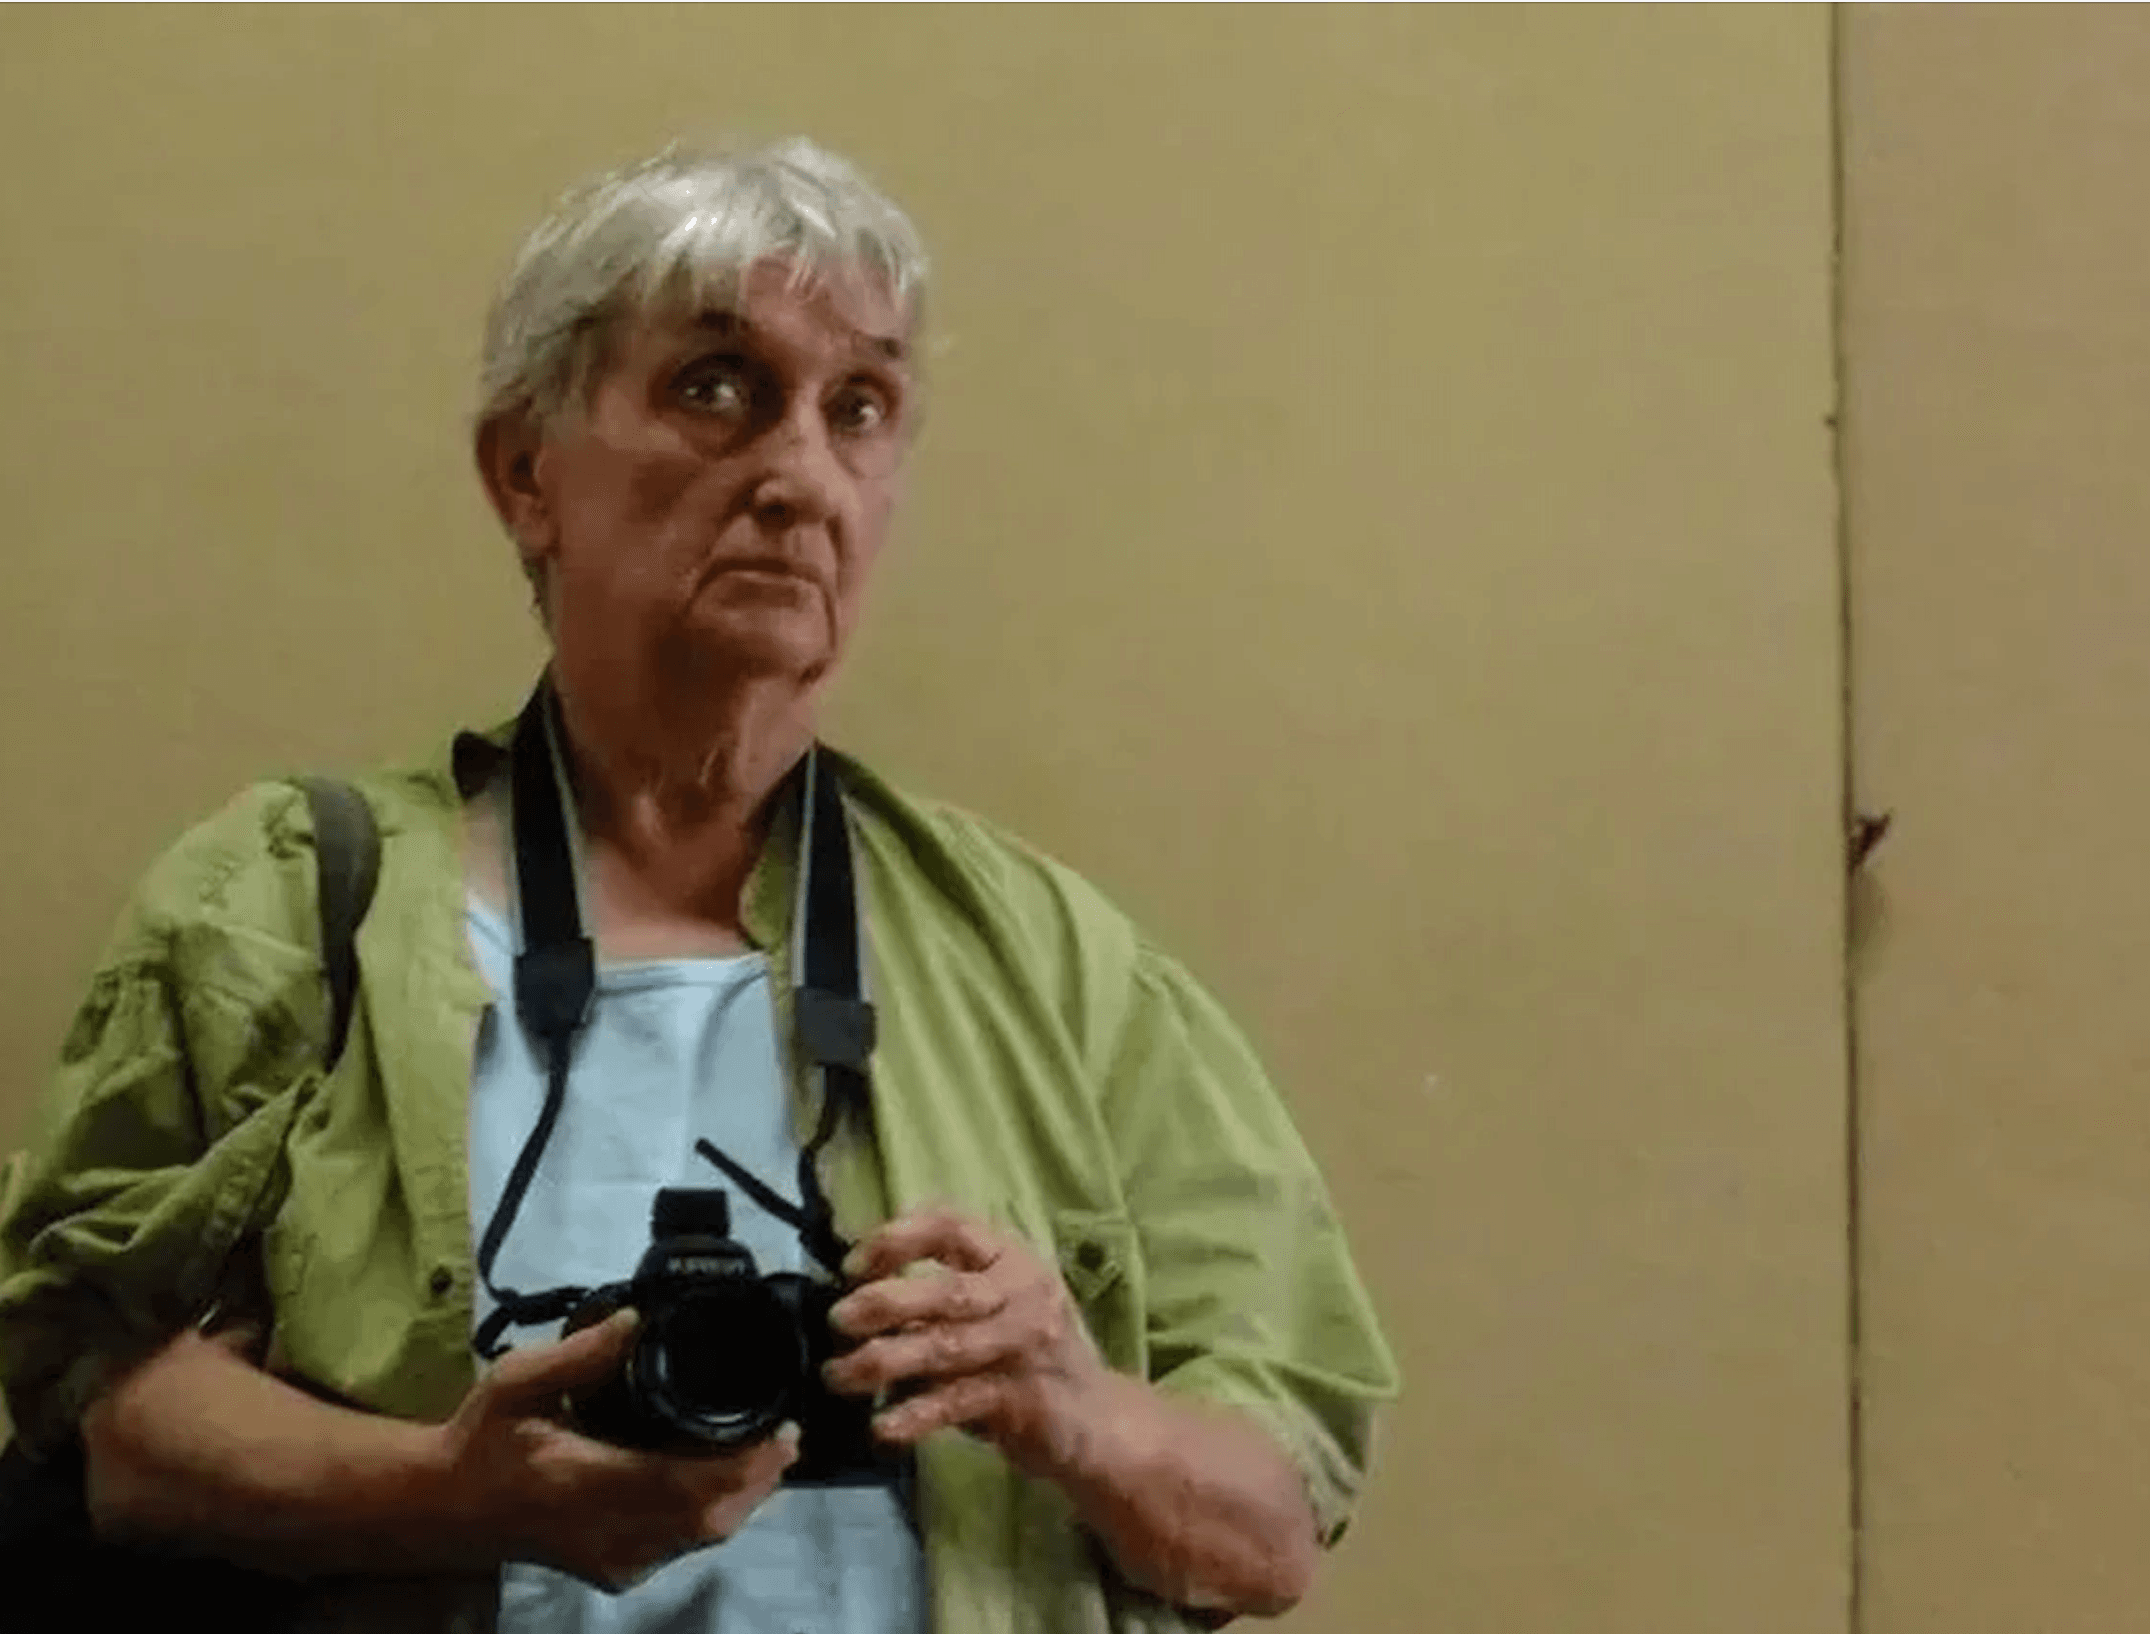 76-year-old Camille Maheux, a renowned photographer and a long-term tenant at 135 rue du Port, was the first to be identified among the dead.